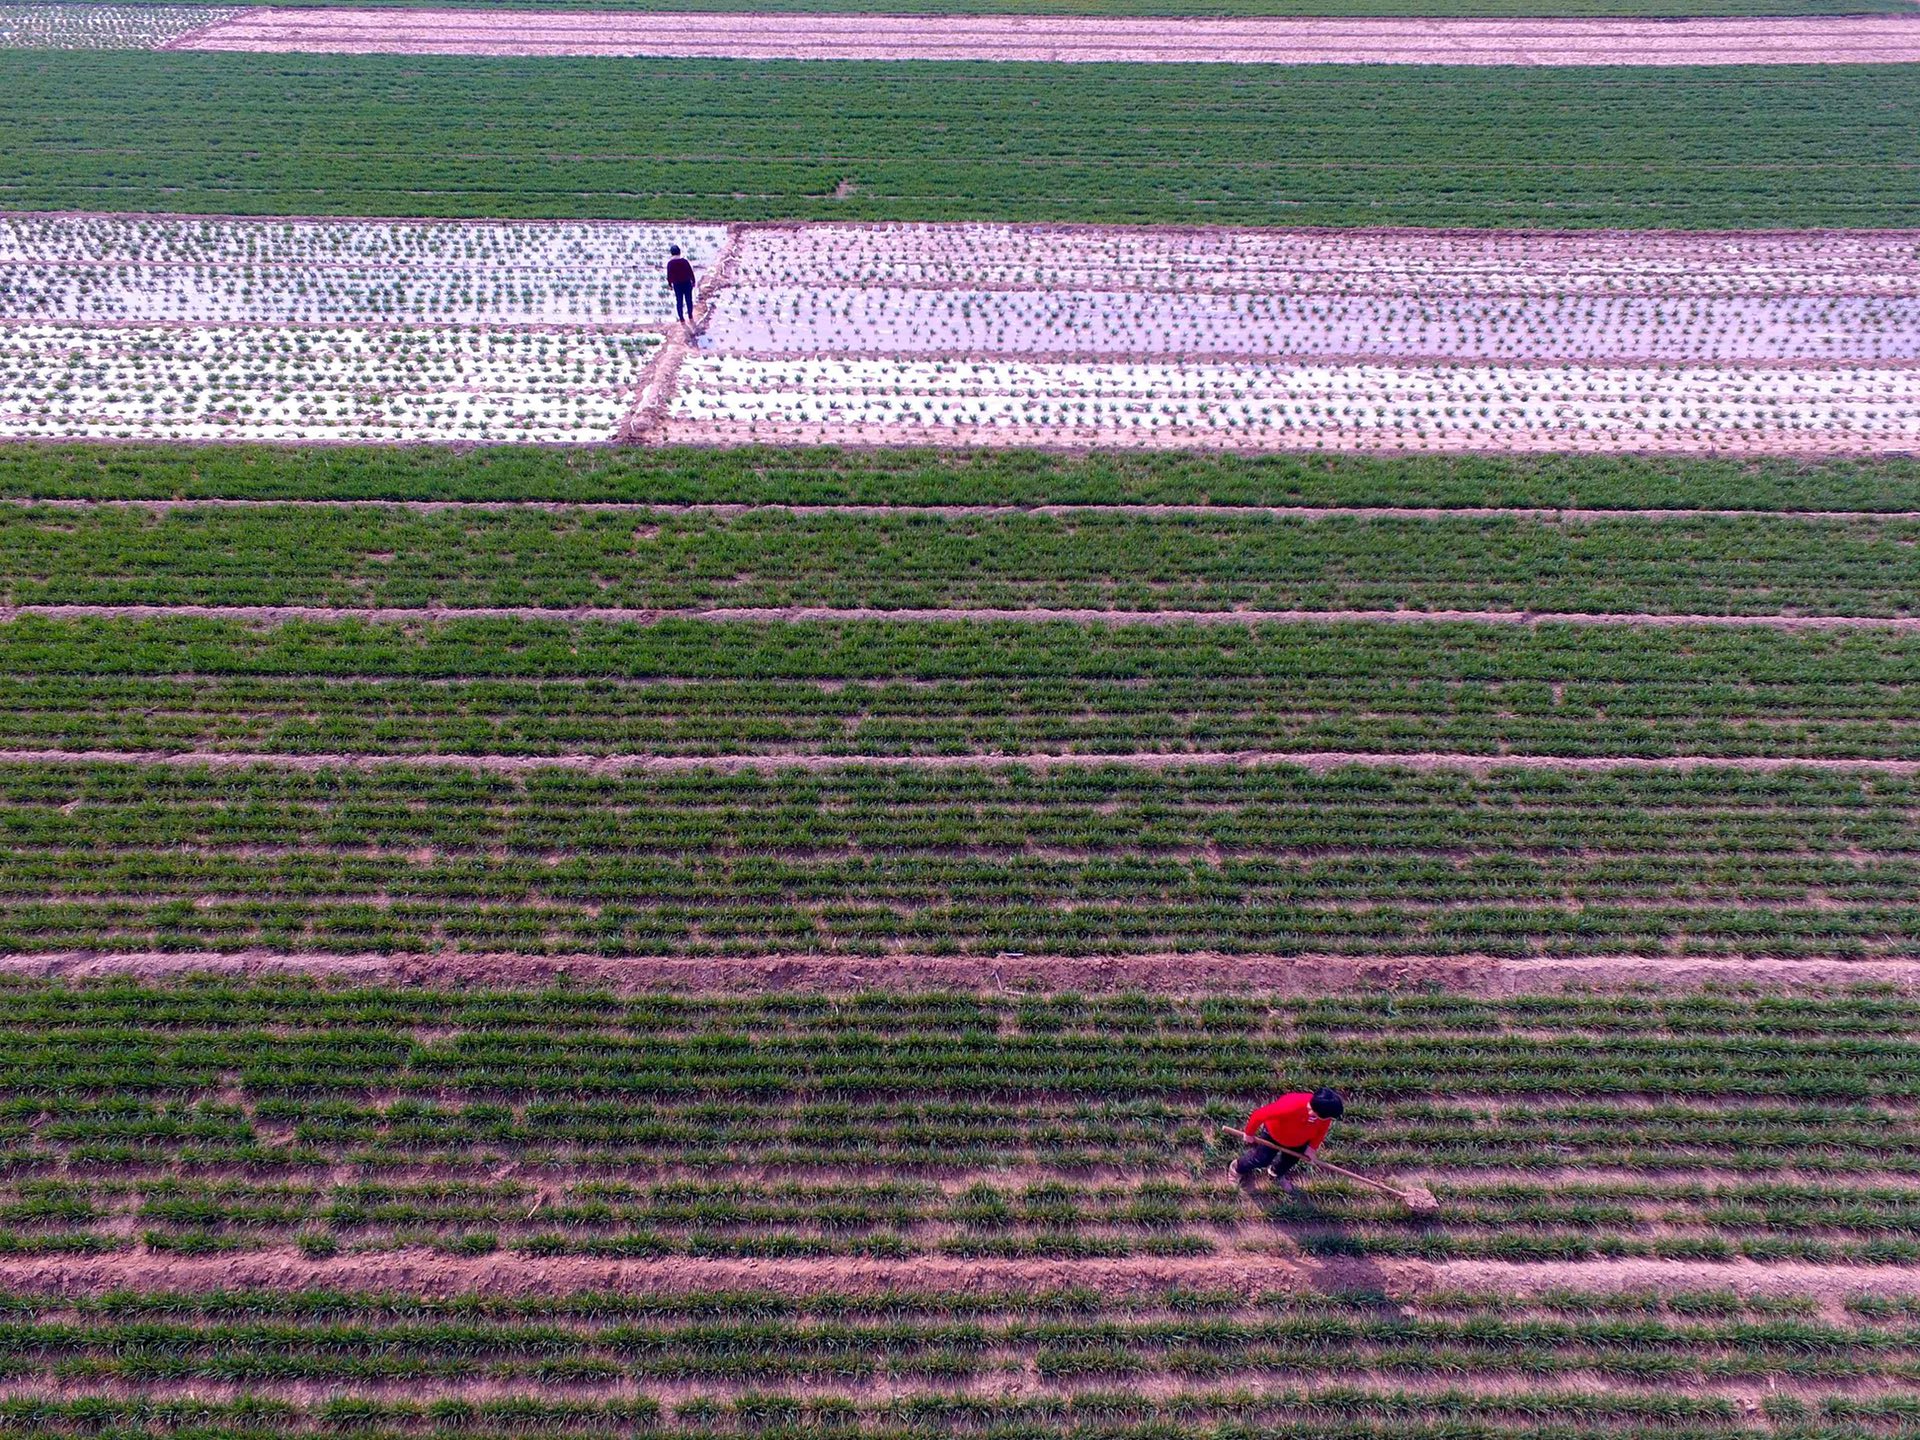 Farmers working in a wheat field. Genetically modified organisms are banned in China but the debate over whether to introduce them rages at the annual session of parliament, Liaocheng, China. PHOTO: AFP